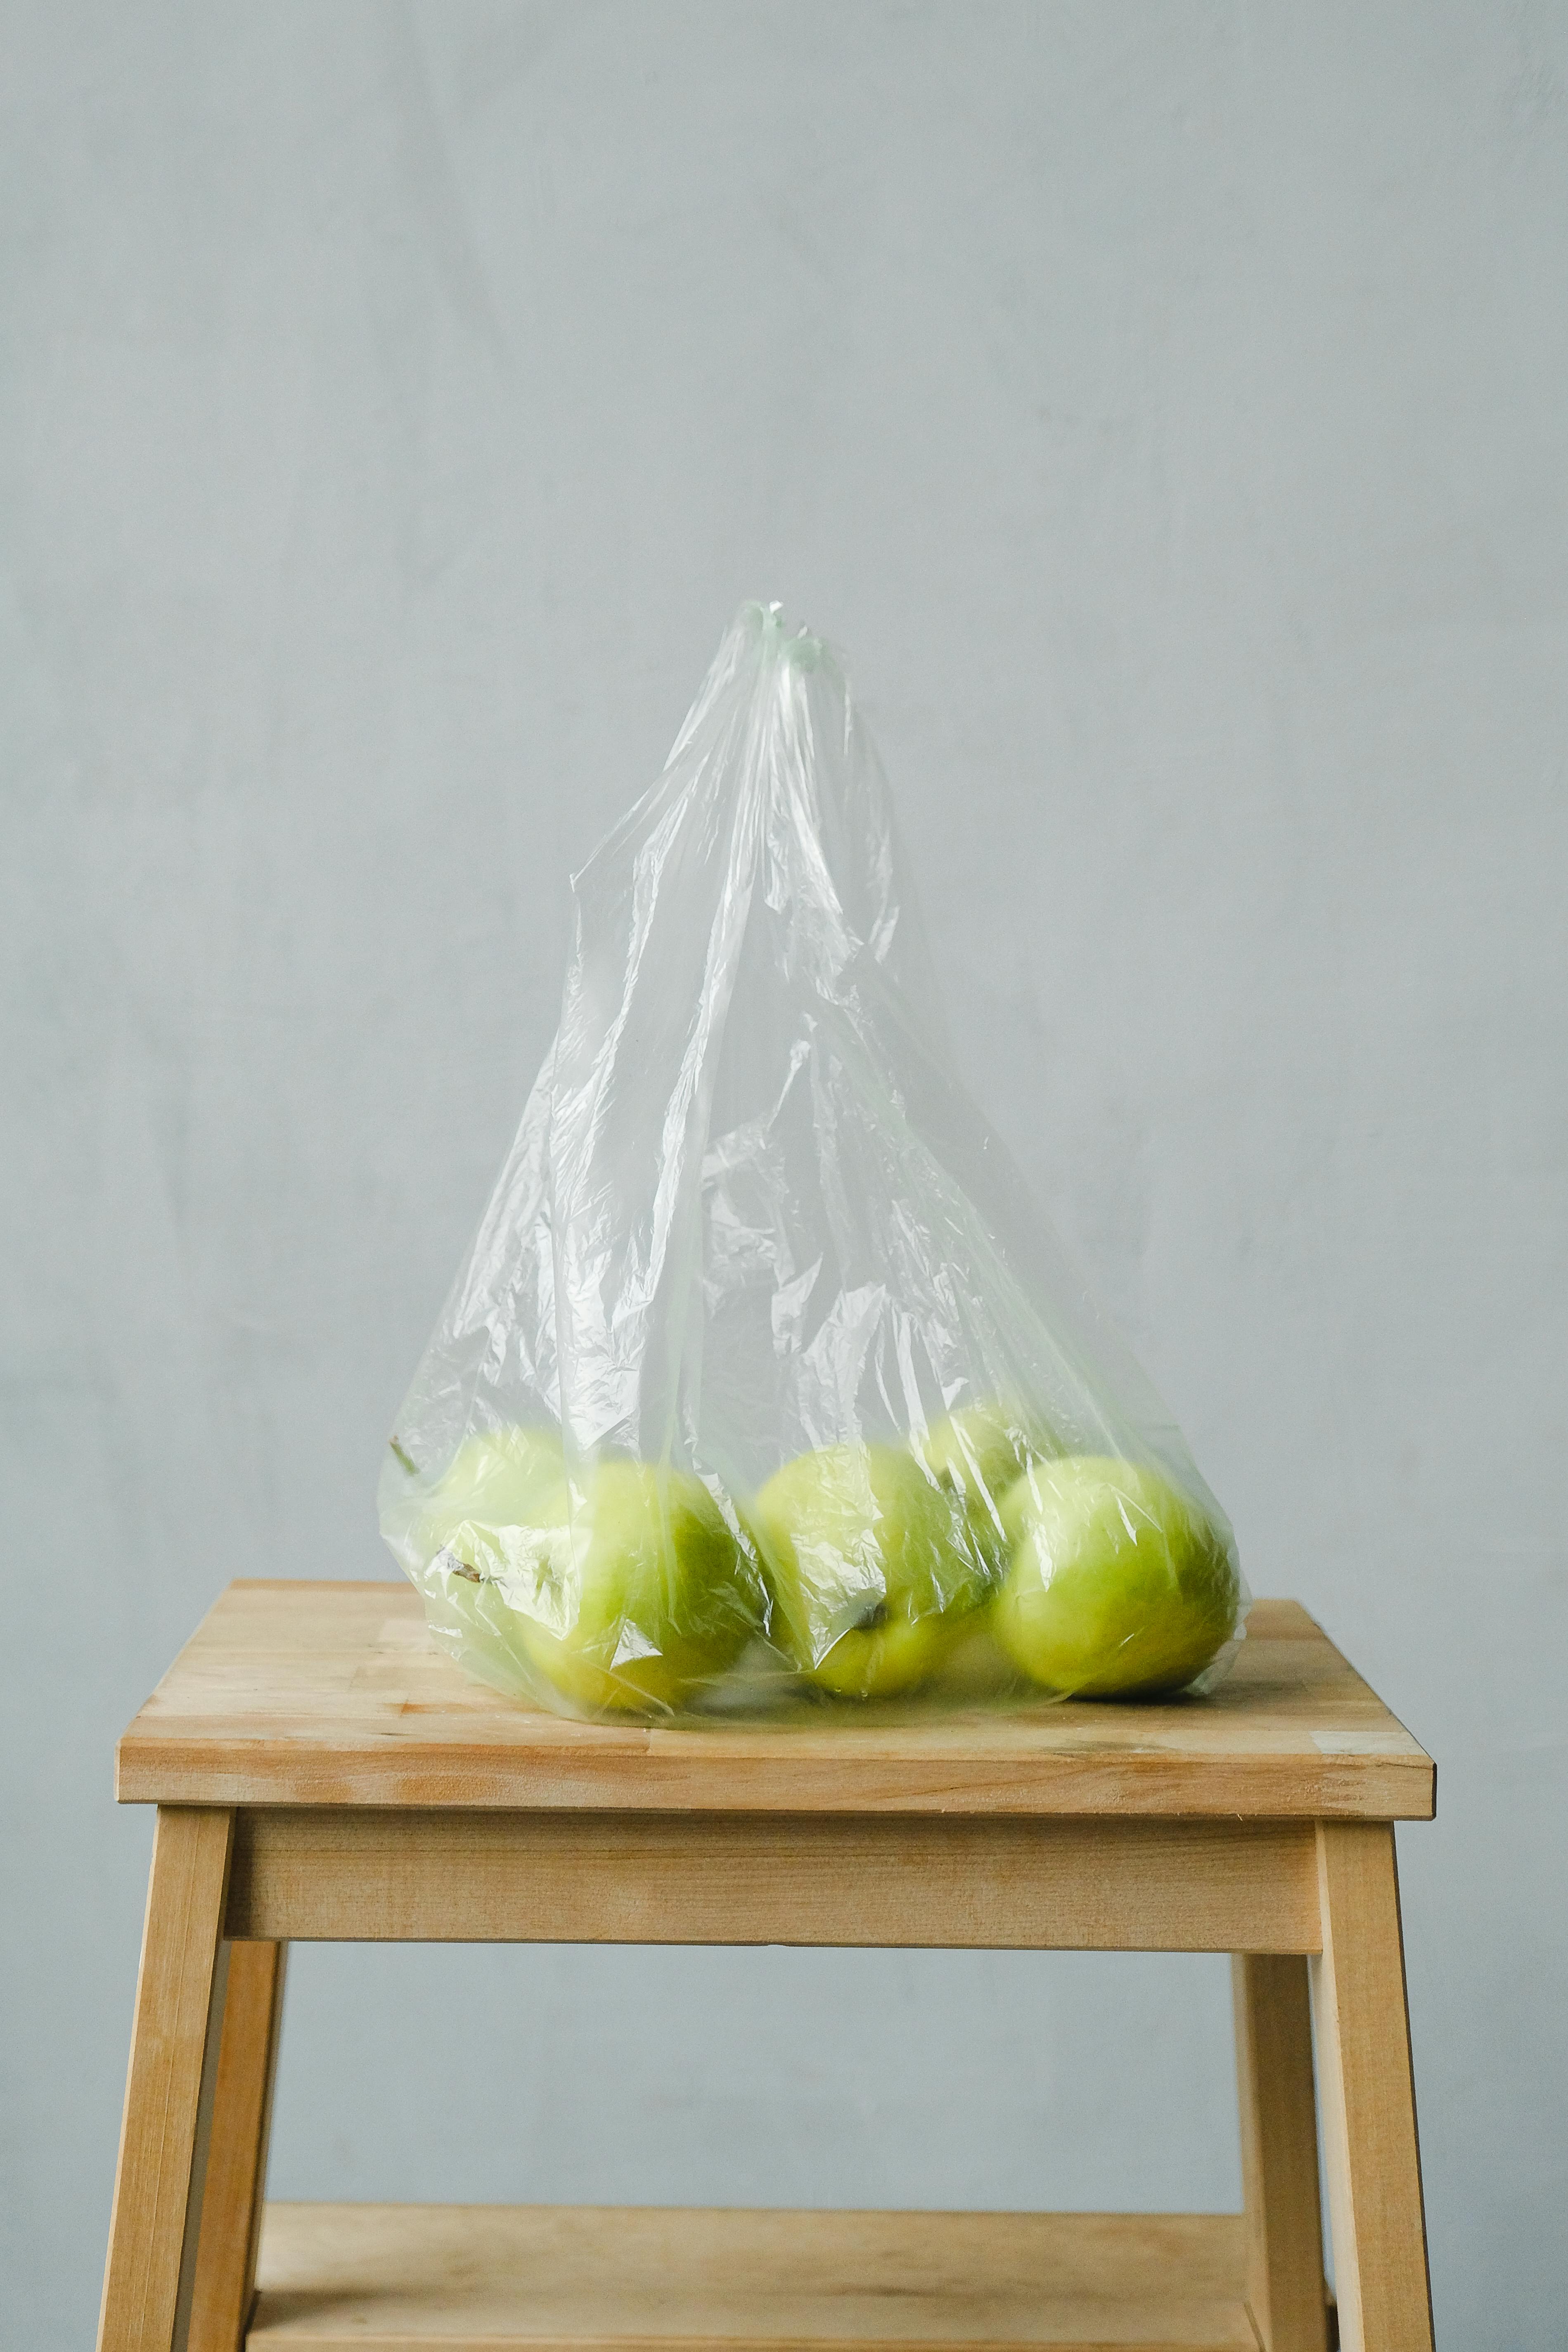 Download Green Apples Inside A Plastic Bag Free Stock Photo Yellowimages Mockups